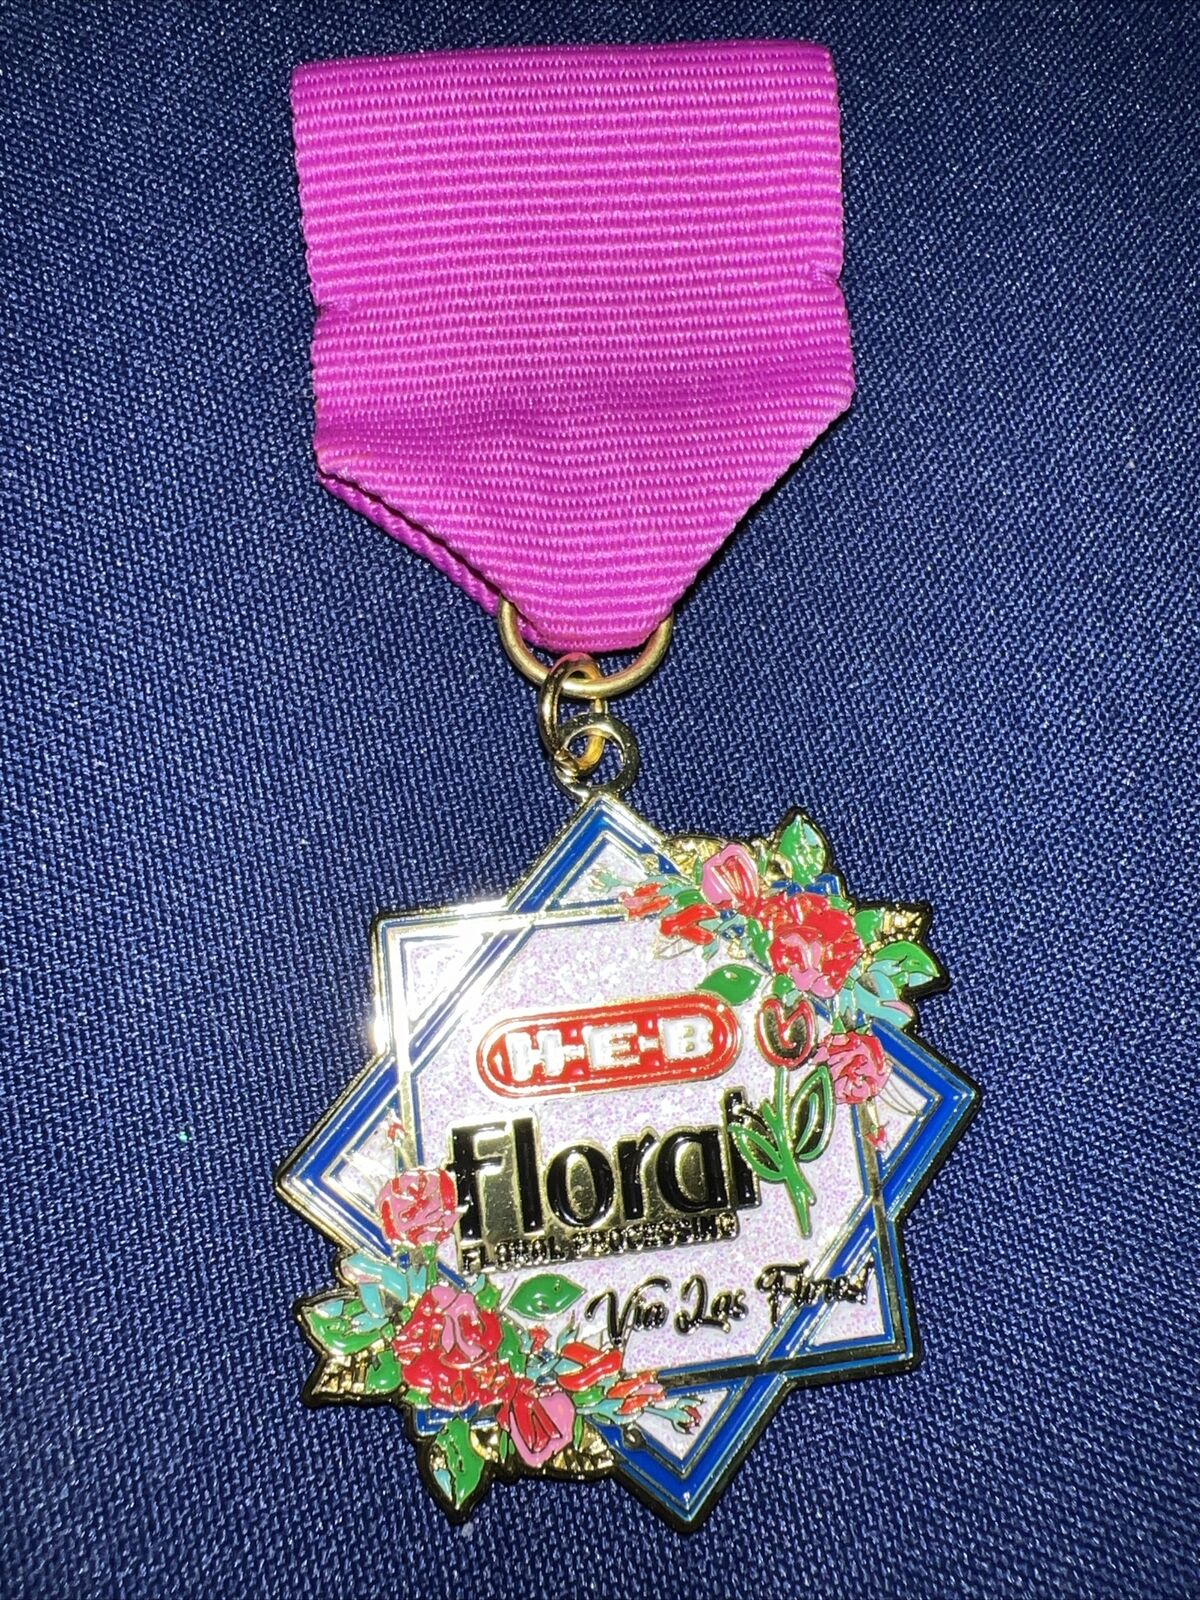 HEB Floral Processing Fiesta Medal New